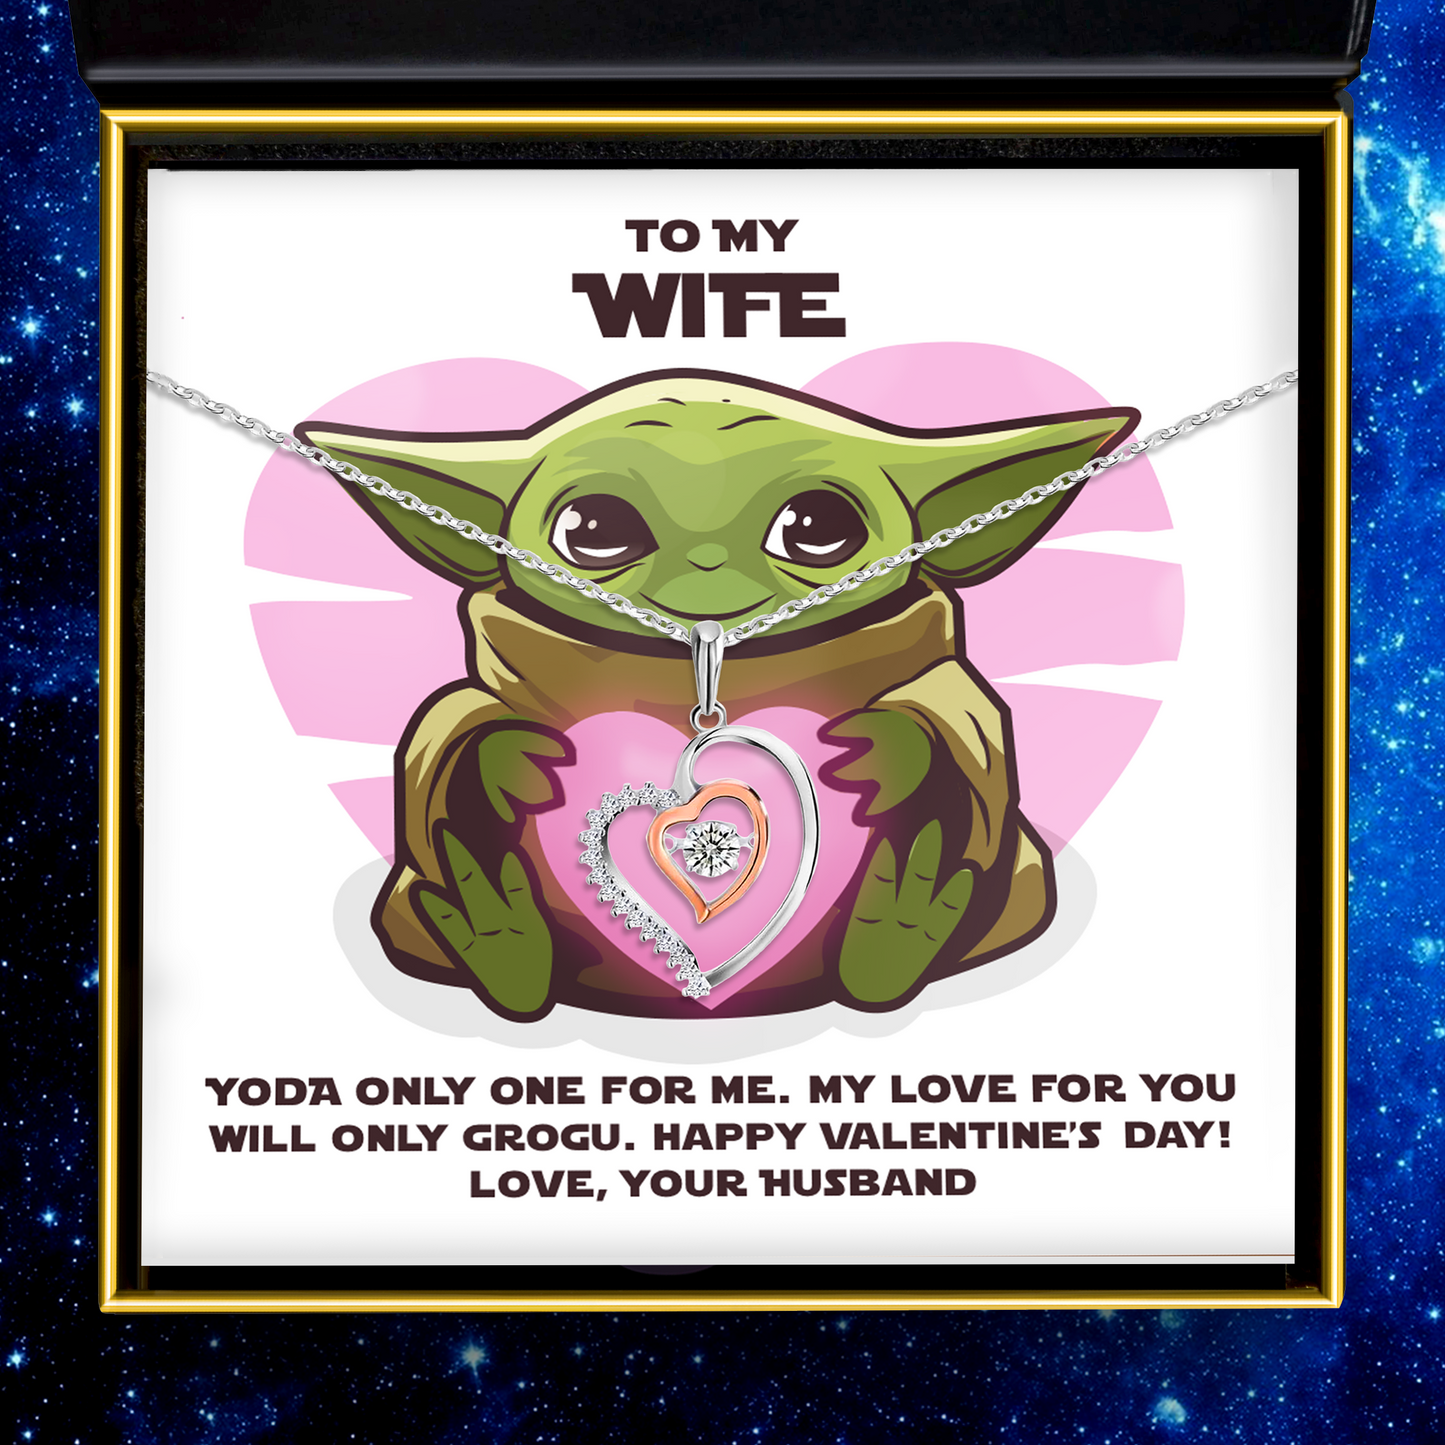 To My Wife, Yoda One For Me (Valentine's Day Card) - Luxe Heart Necklace Gift Set